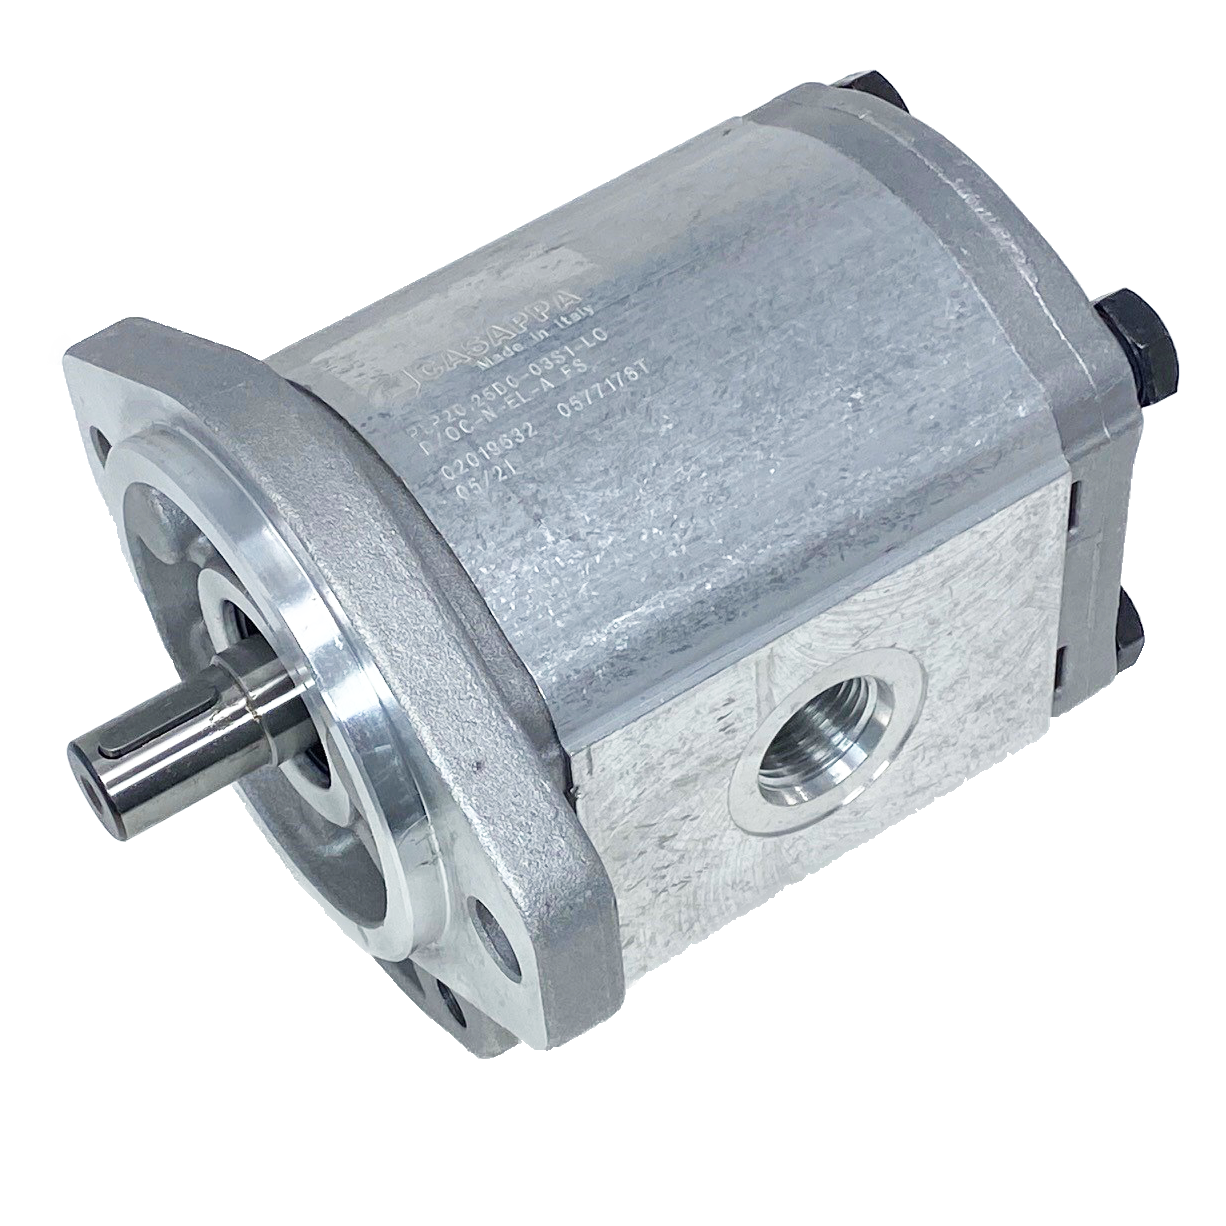 PHP20.27,8S0-31S9-LOG/OC-N-EL : Casappa Polaris Gear Pump, 28.21cc, 2900psi Rated, 2500RPM, CCW, 5/8" Bore x 5/32" Key Shaft, SAE A 2-Bolt Flange, 1.25" #20 SAE Inlet, 0.625 (5/8") #10 SAE Outlet, Cast Iron Body, Aluminum Flange